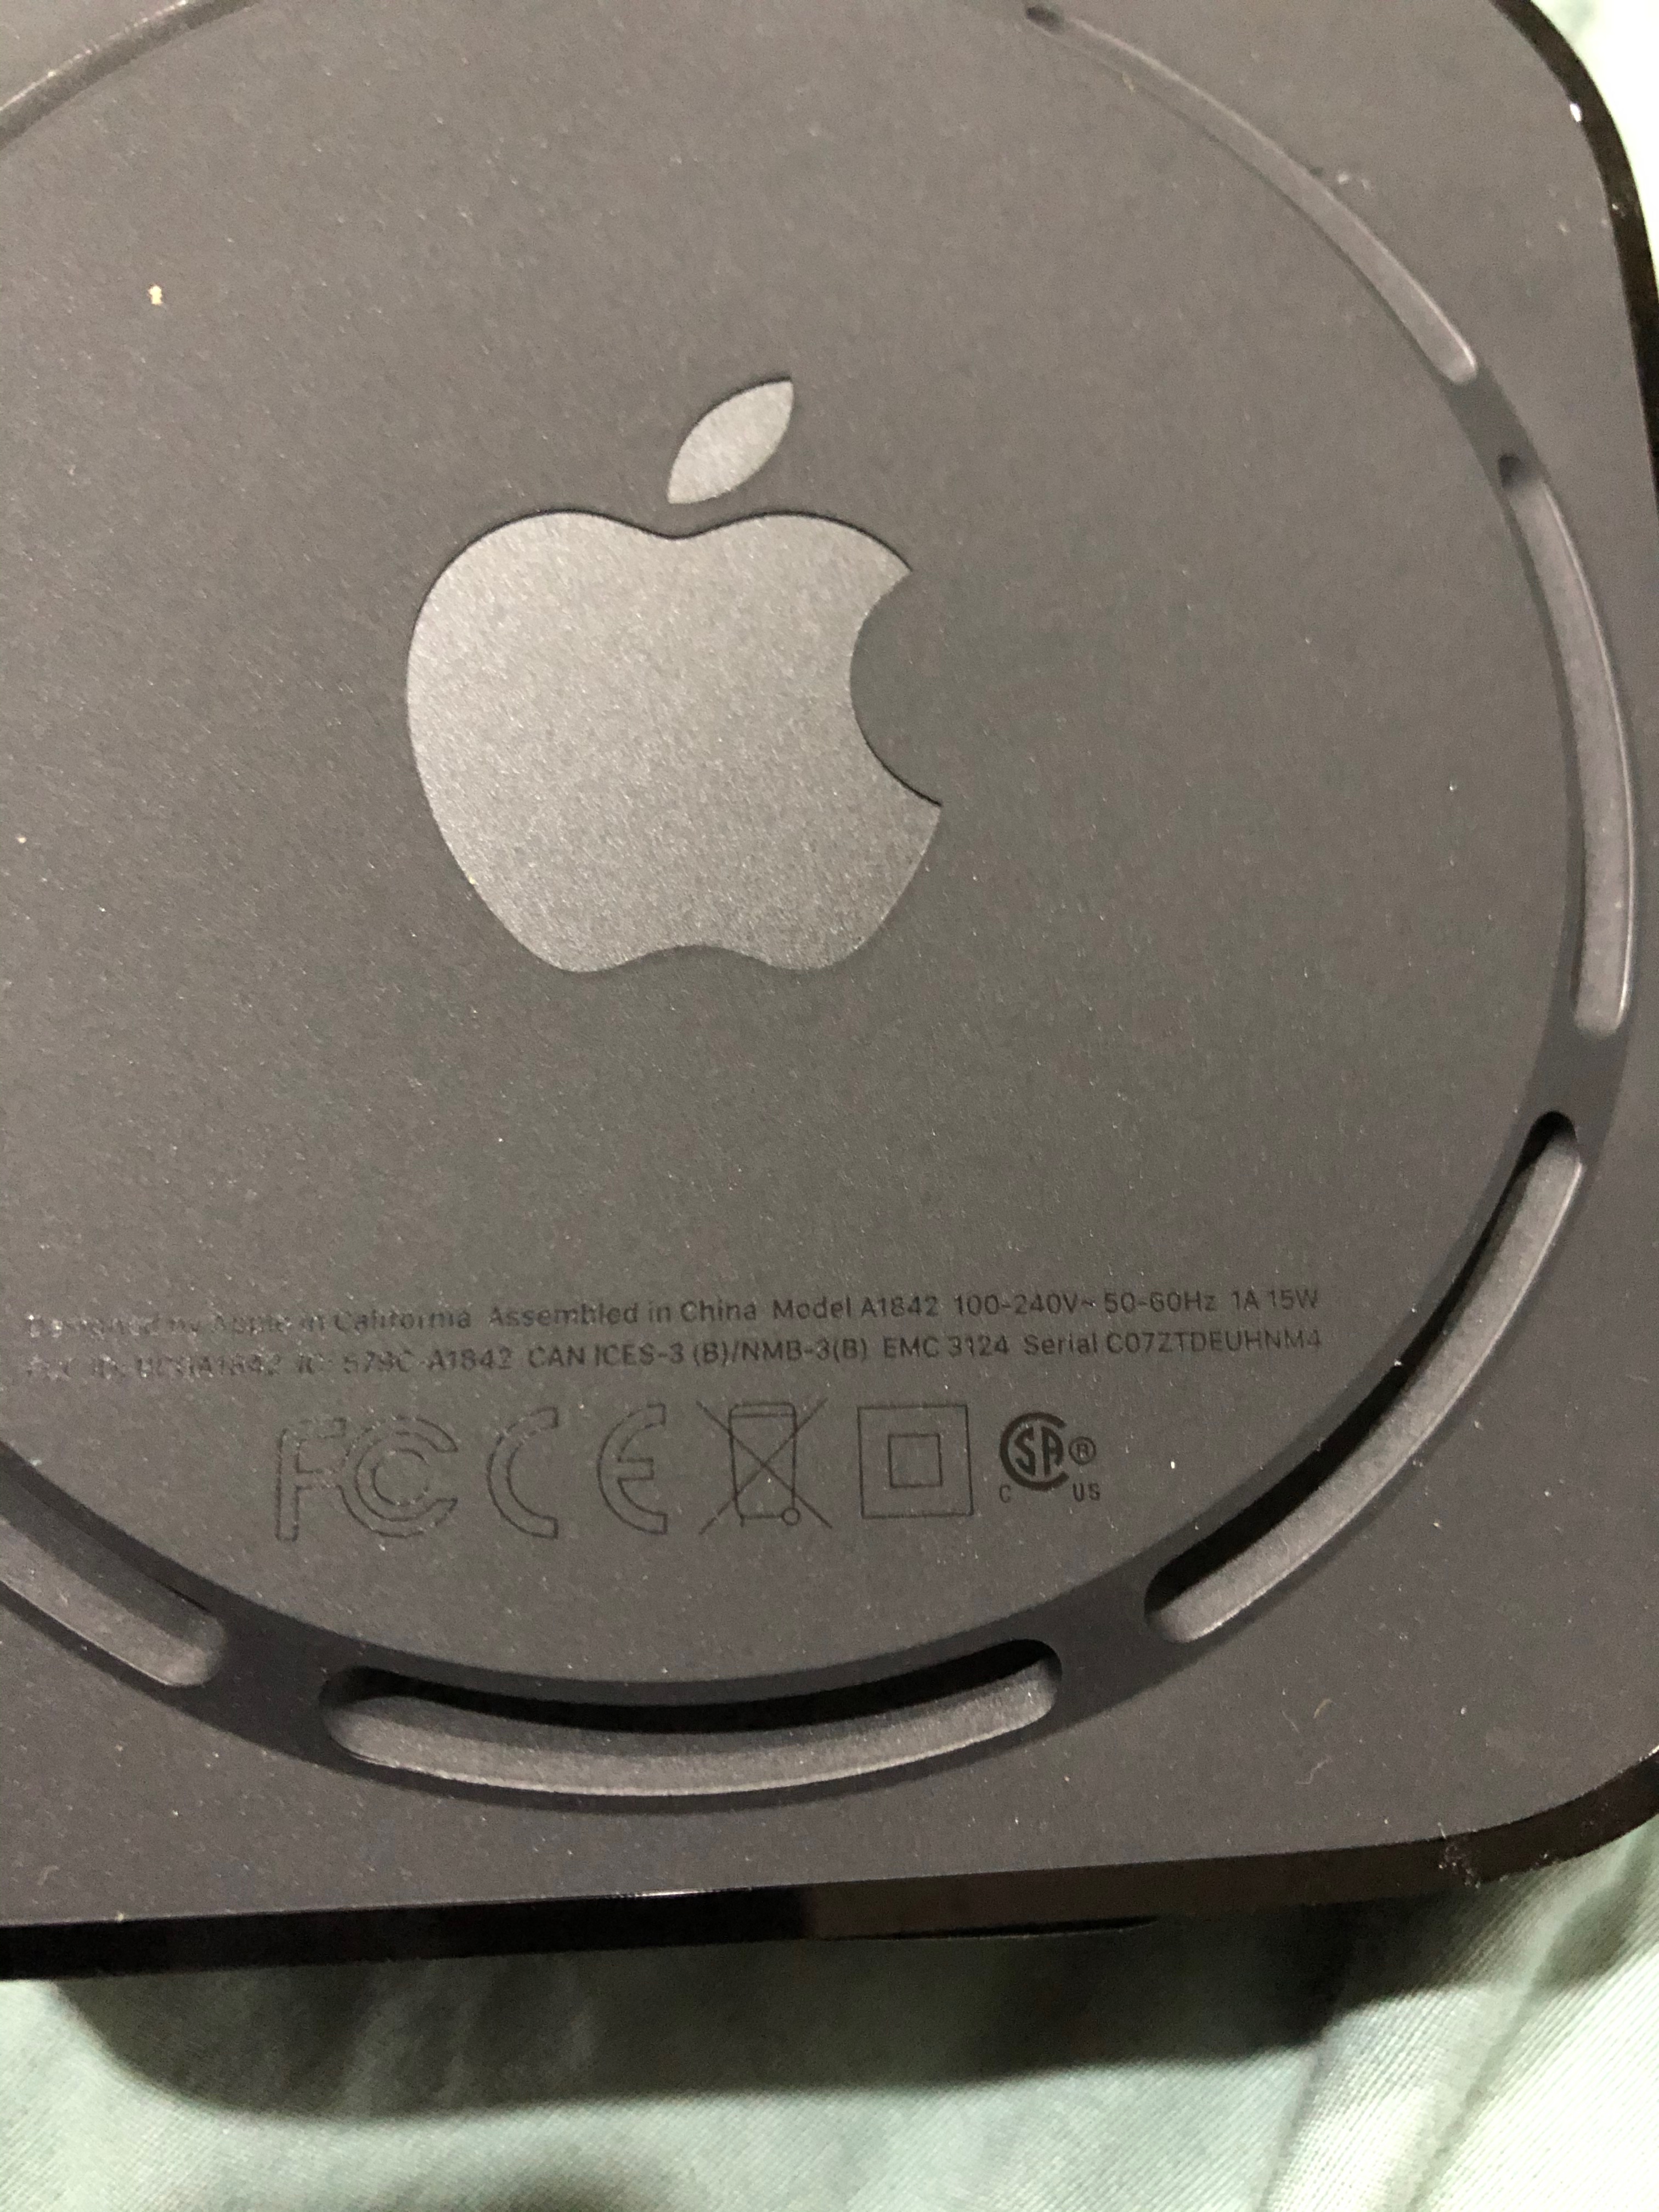 Apple bought in usa - Apple Community